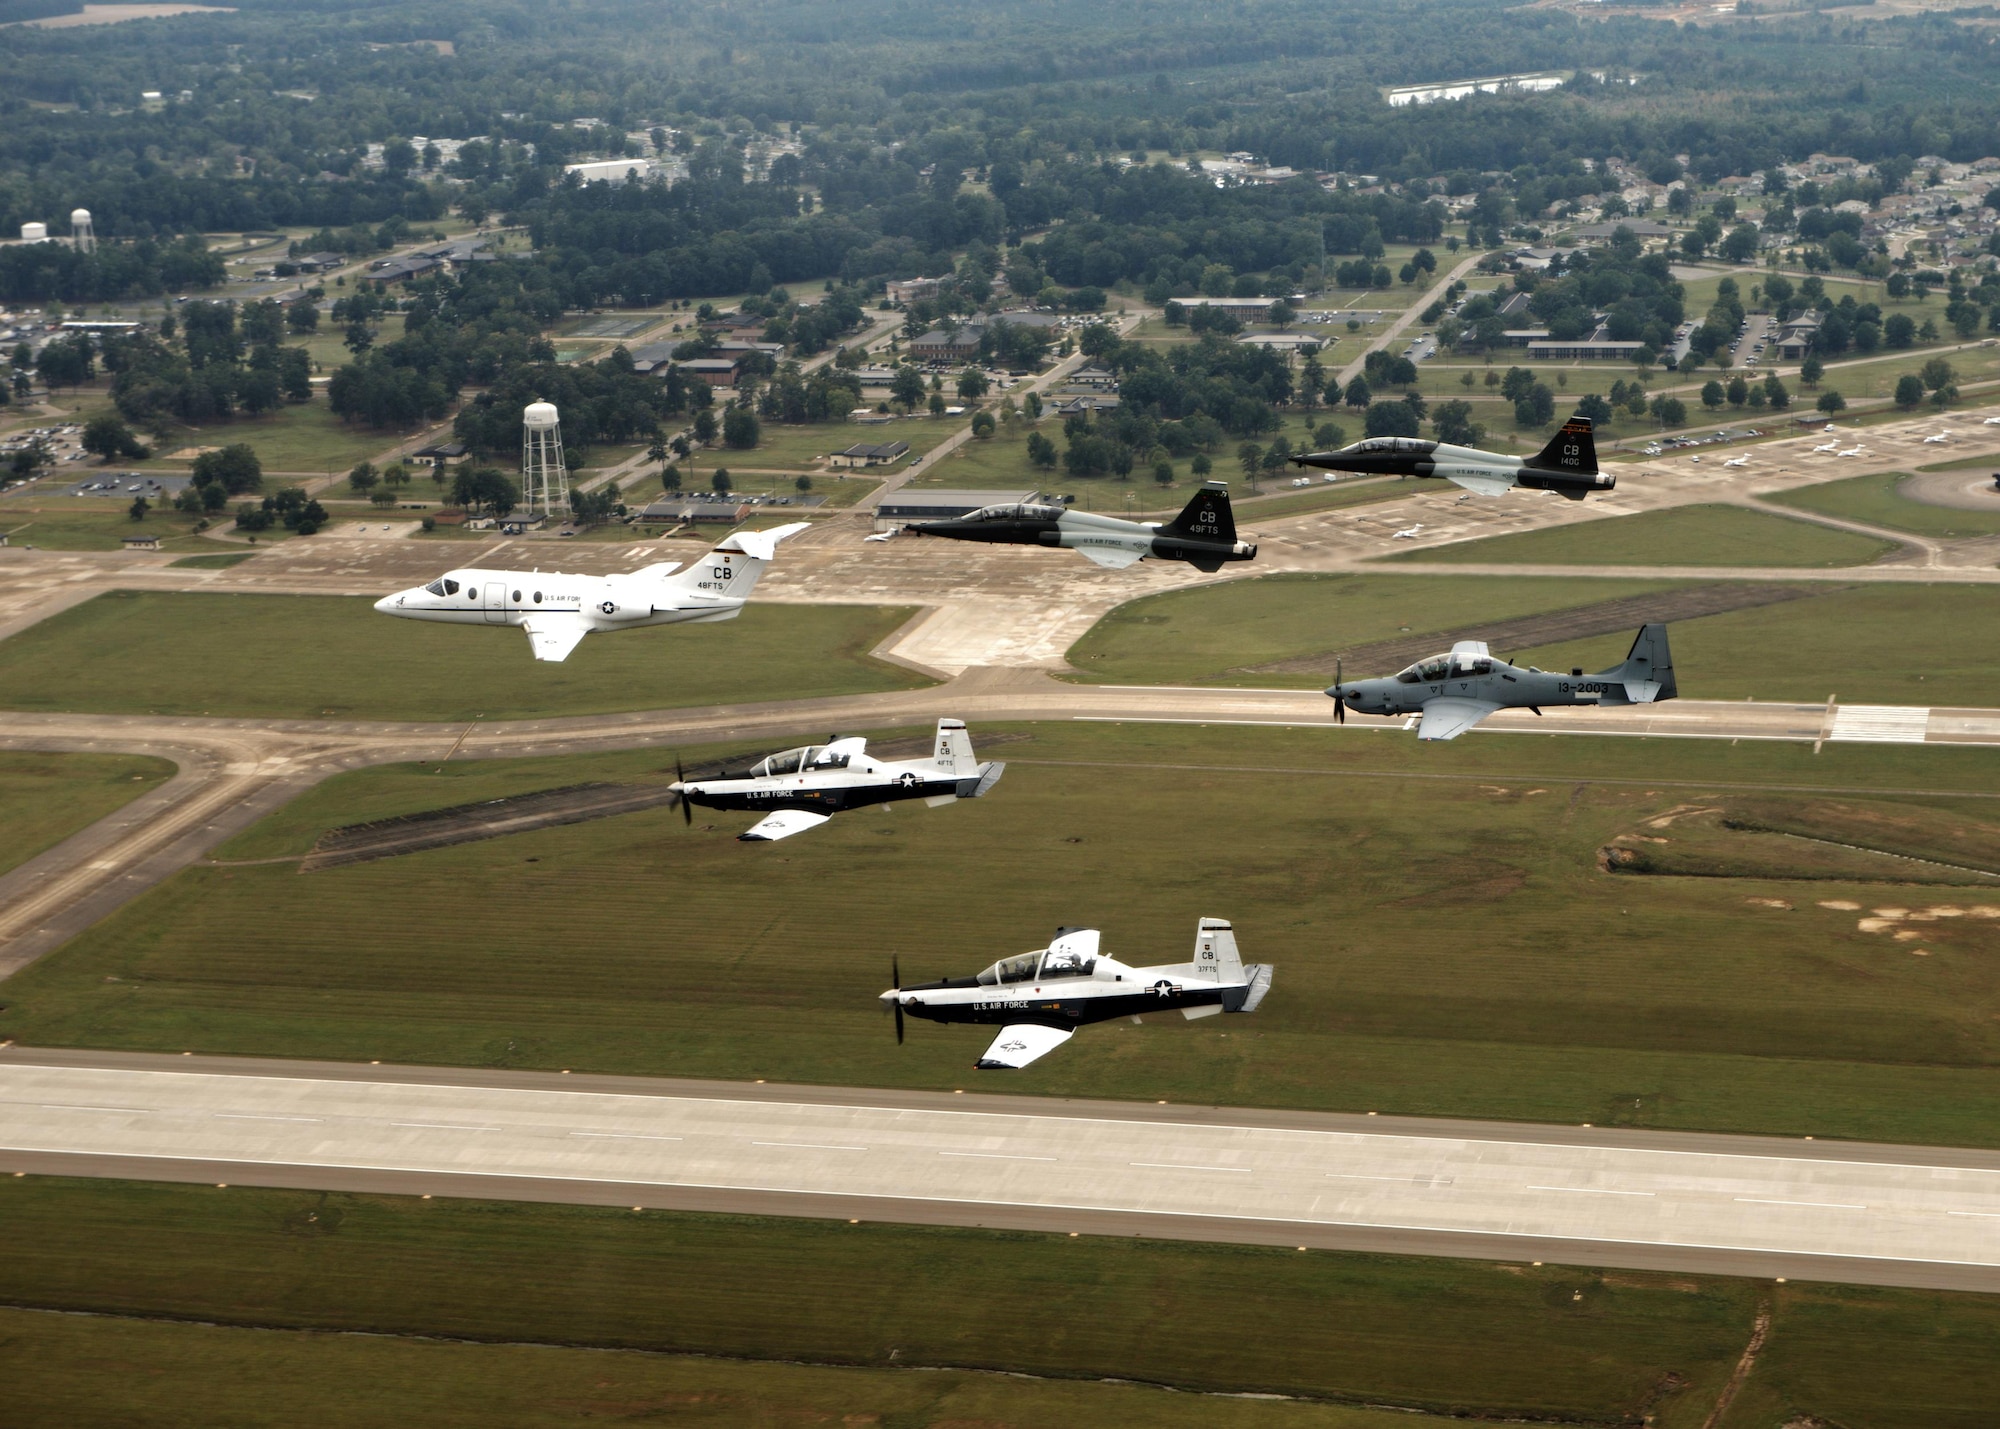 An aircraft from each of the 14th Flying Training Wing flying squadrons were represented in a dissimilar formation above Columbus Air Force Base, Mississippi Oct.1, 2015. The formation flight was performed to showcase the capability of Columbus’ aircraft to incorporate the A-29 into a formation of six aircraft. (U.S. Air Force photo/Airman 1st Class Daniel Lile)